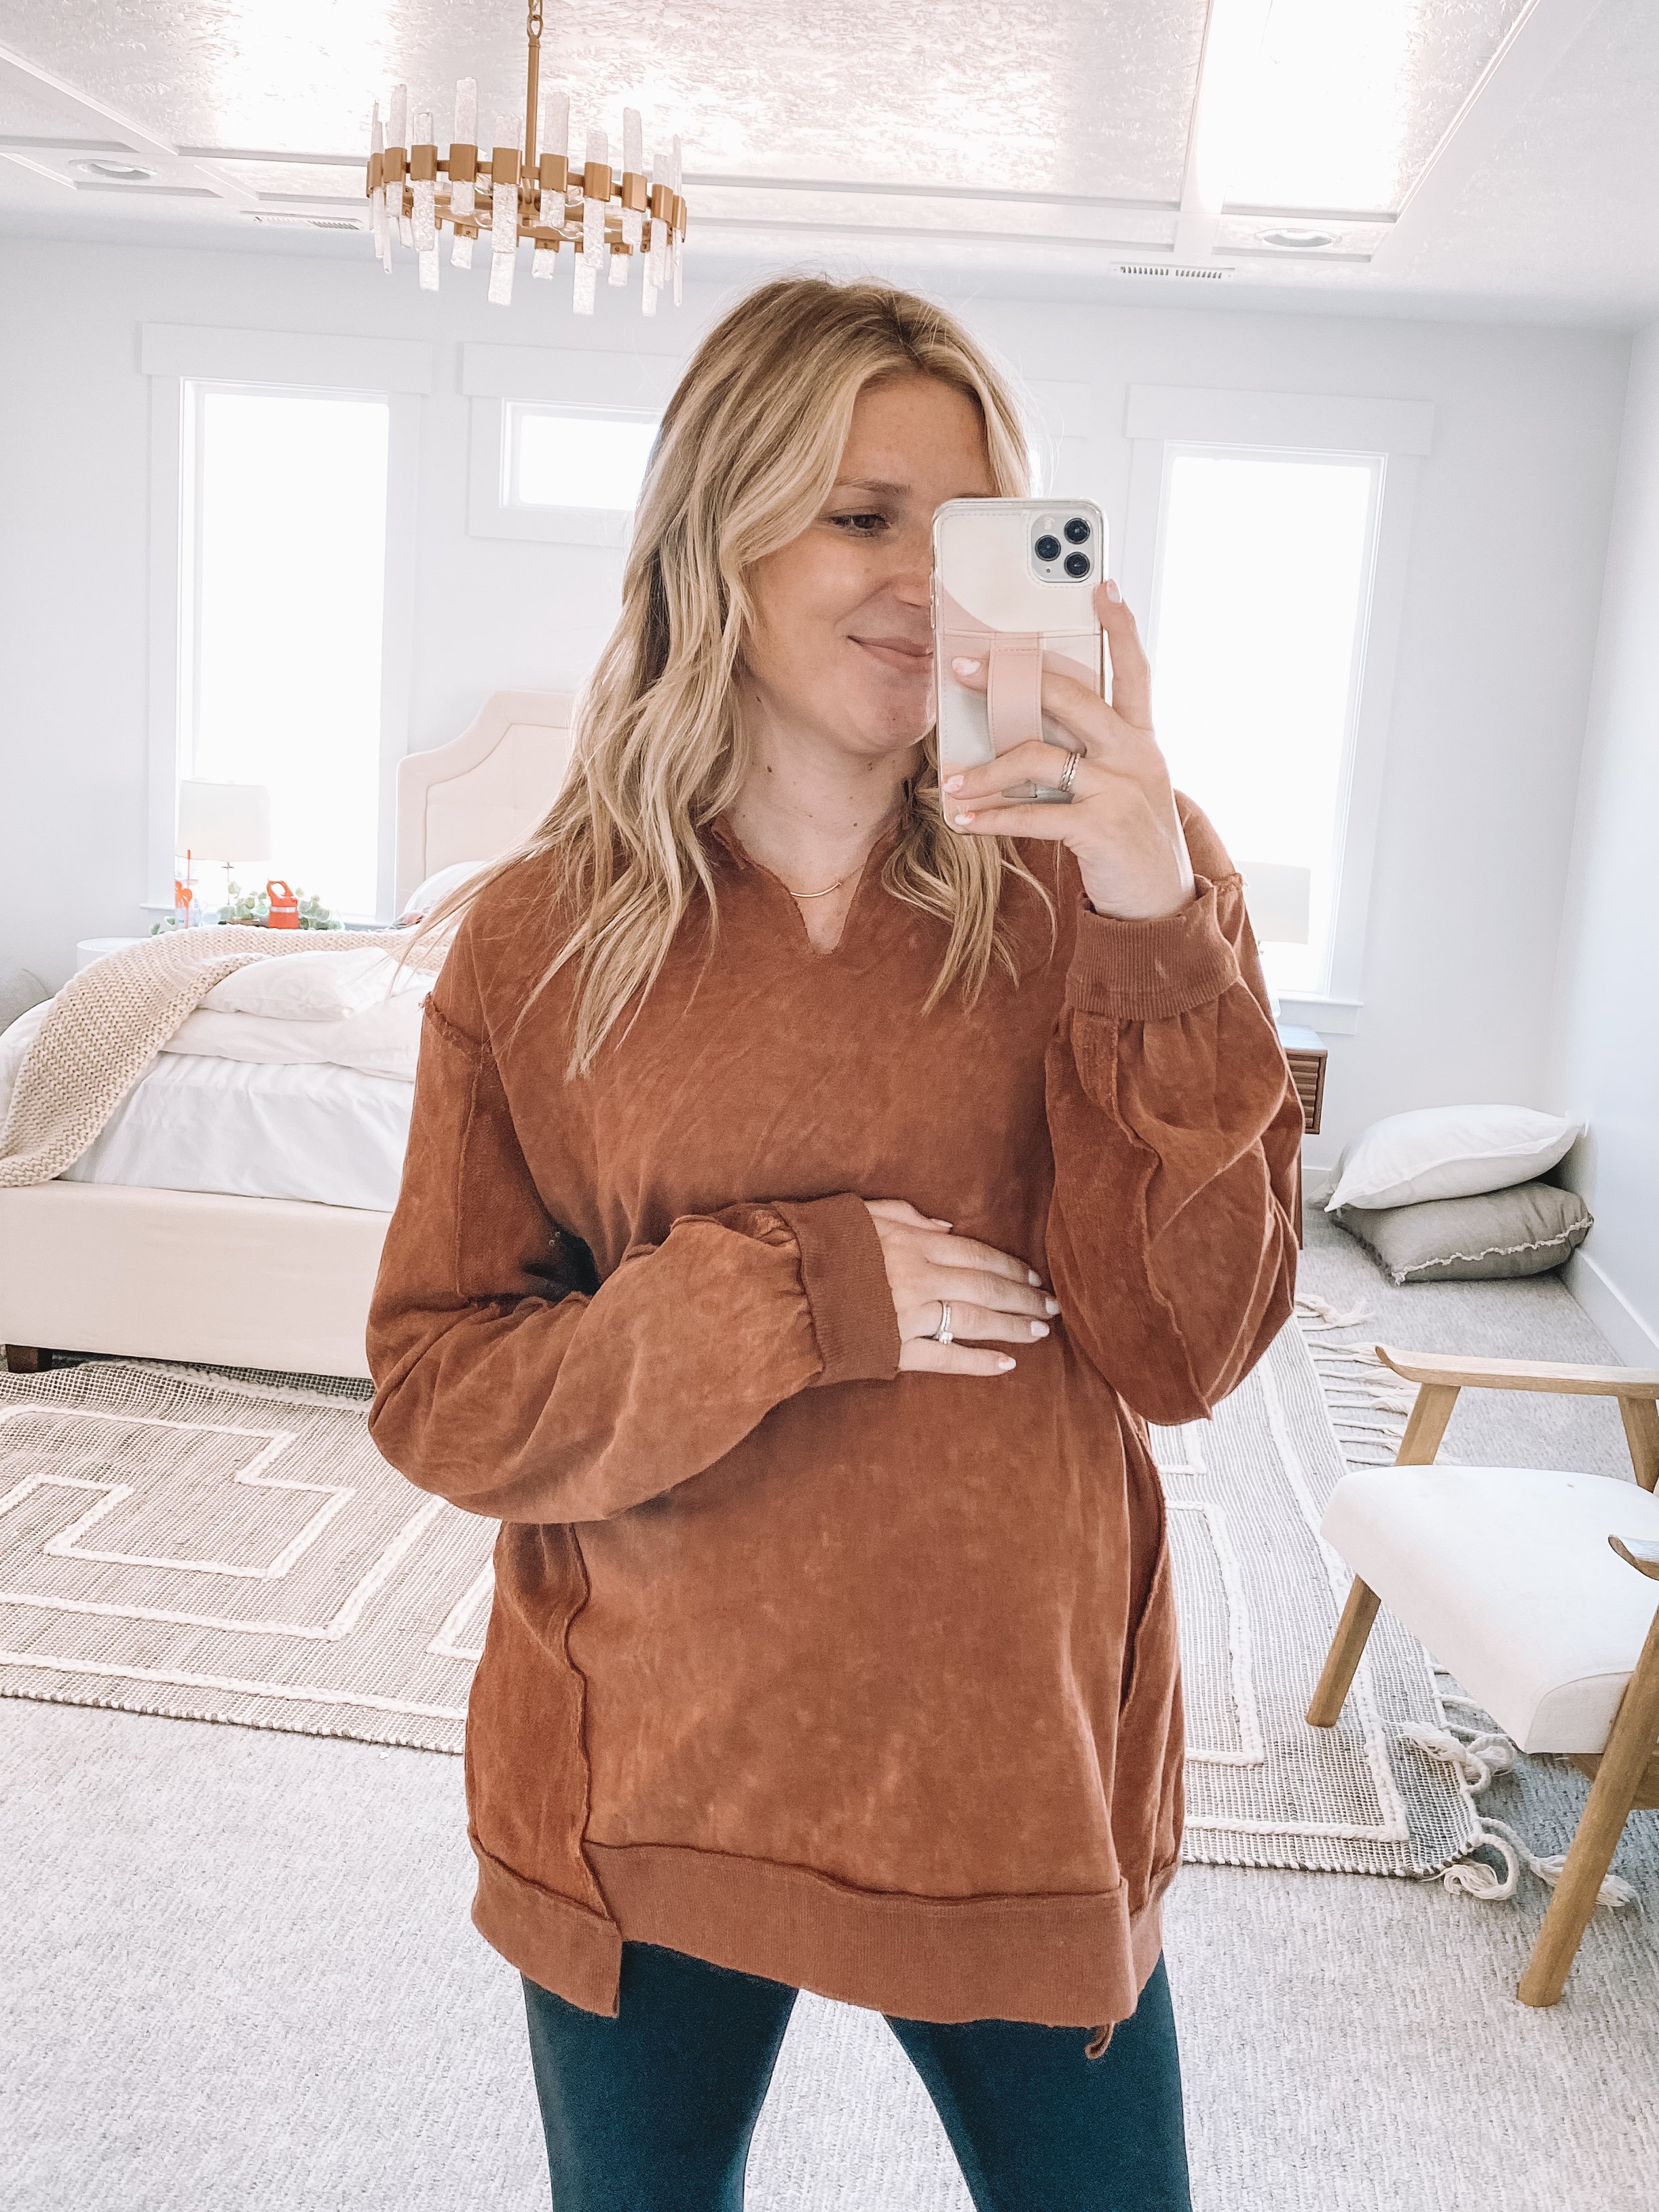 Rust Sweater - Bump-Friendly Fall Outfits